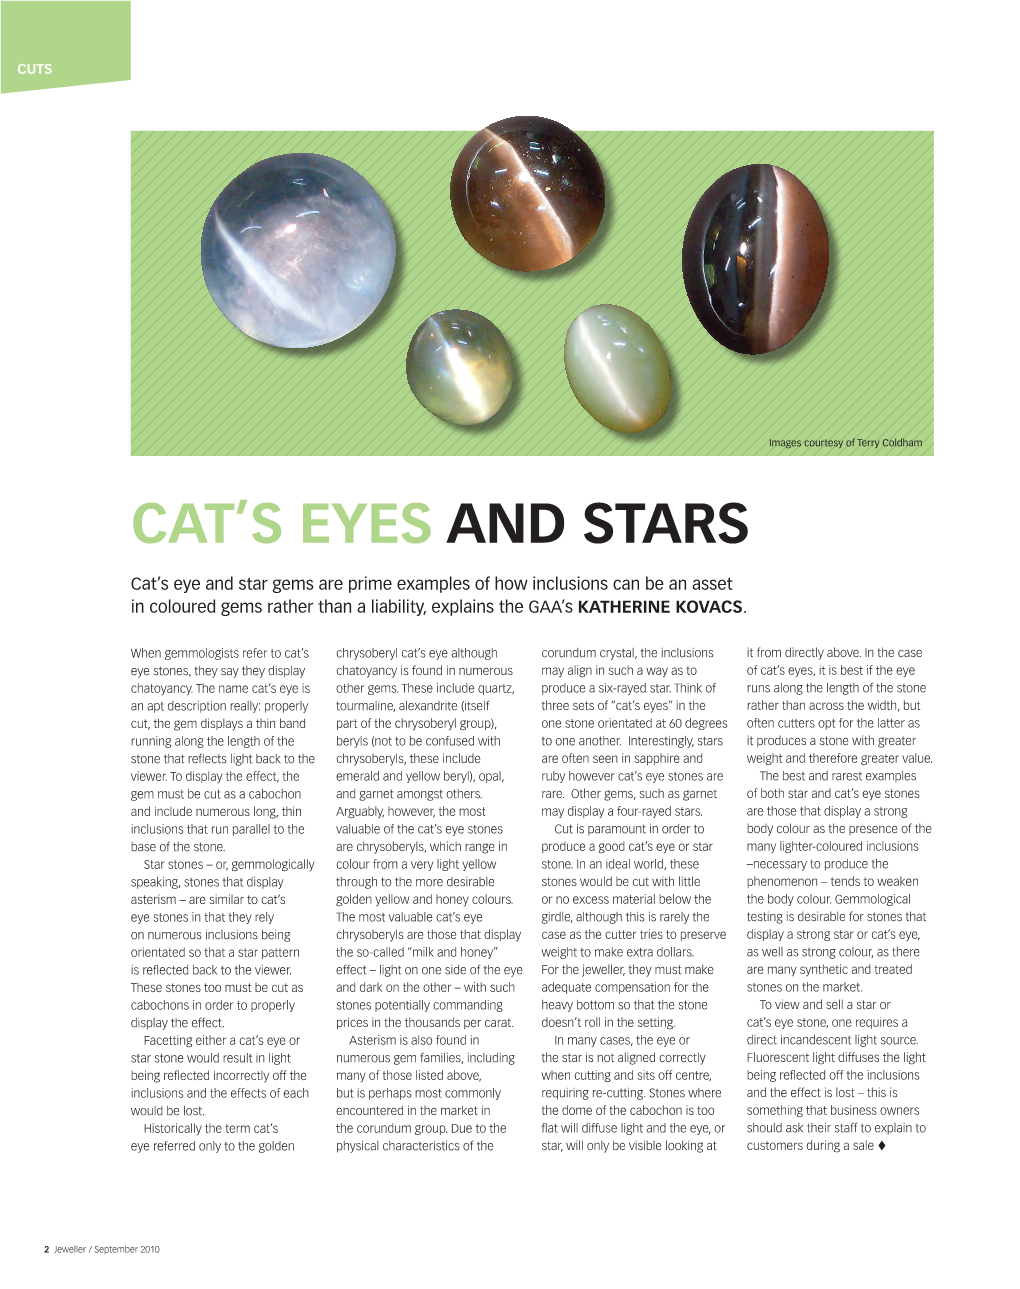 Cat's Eyes and Stars